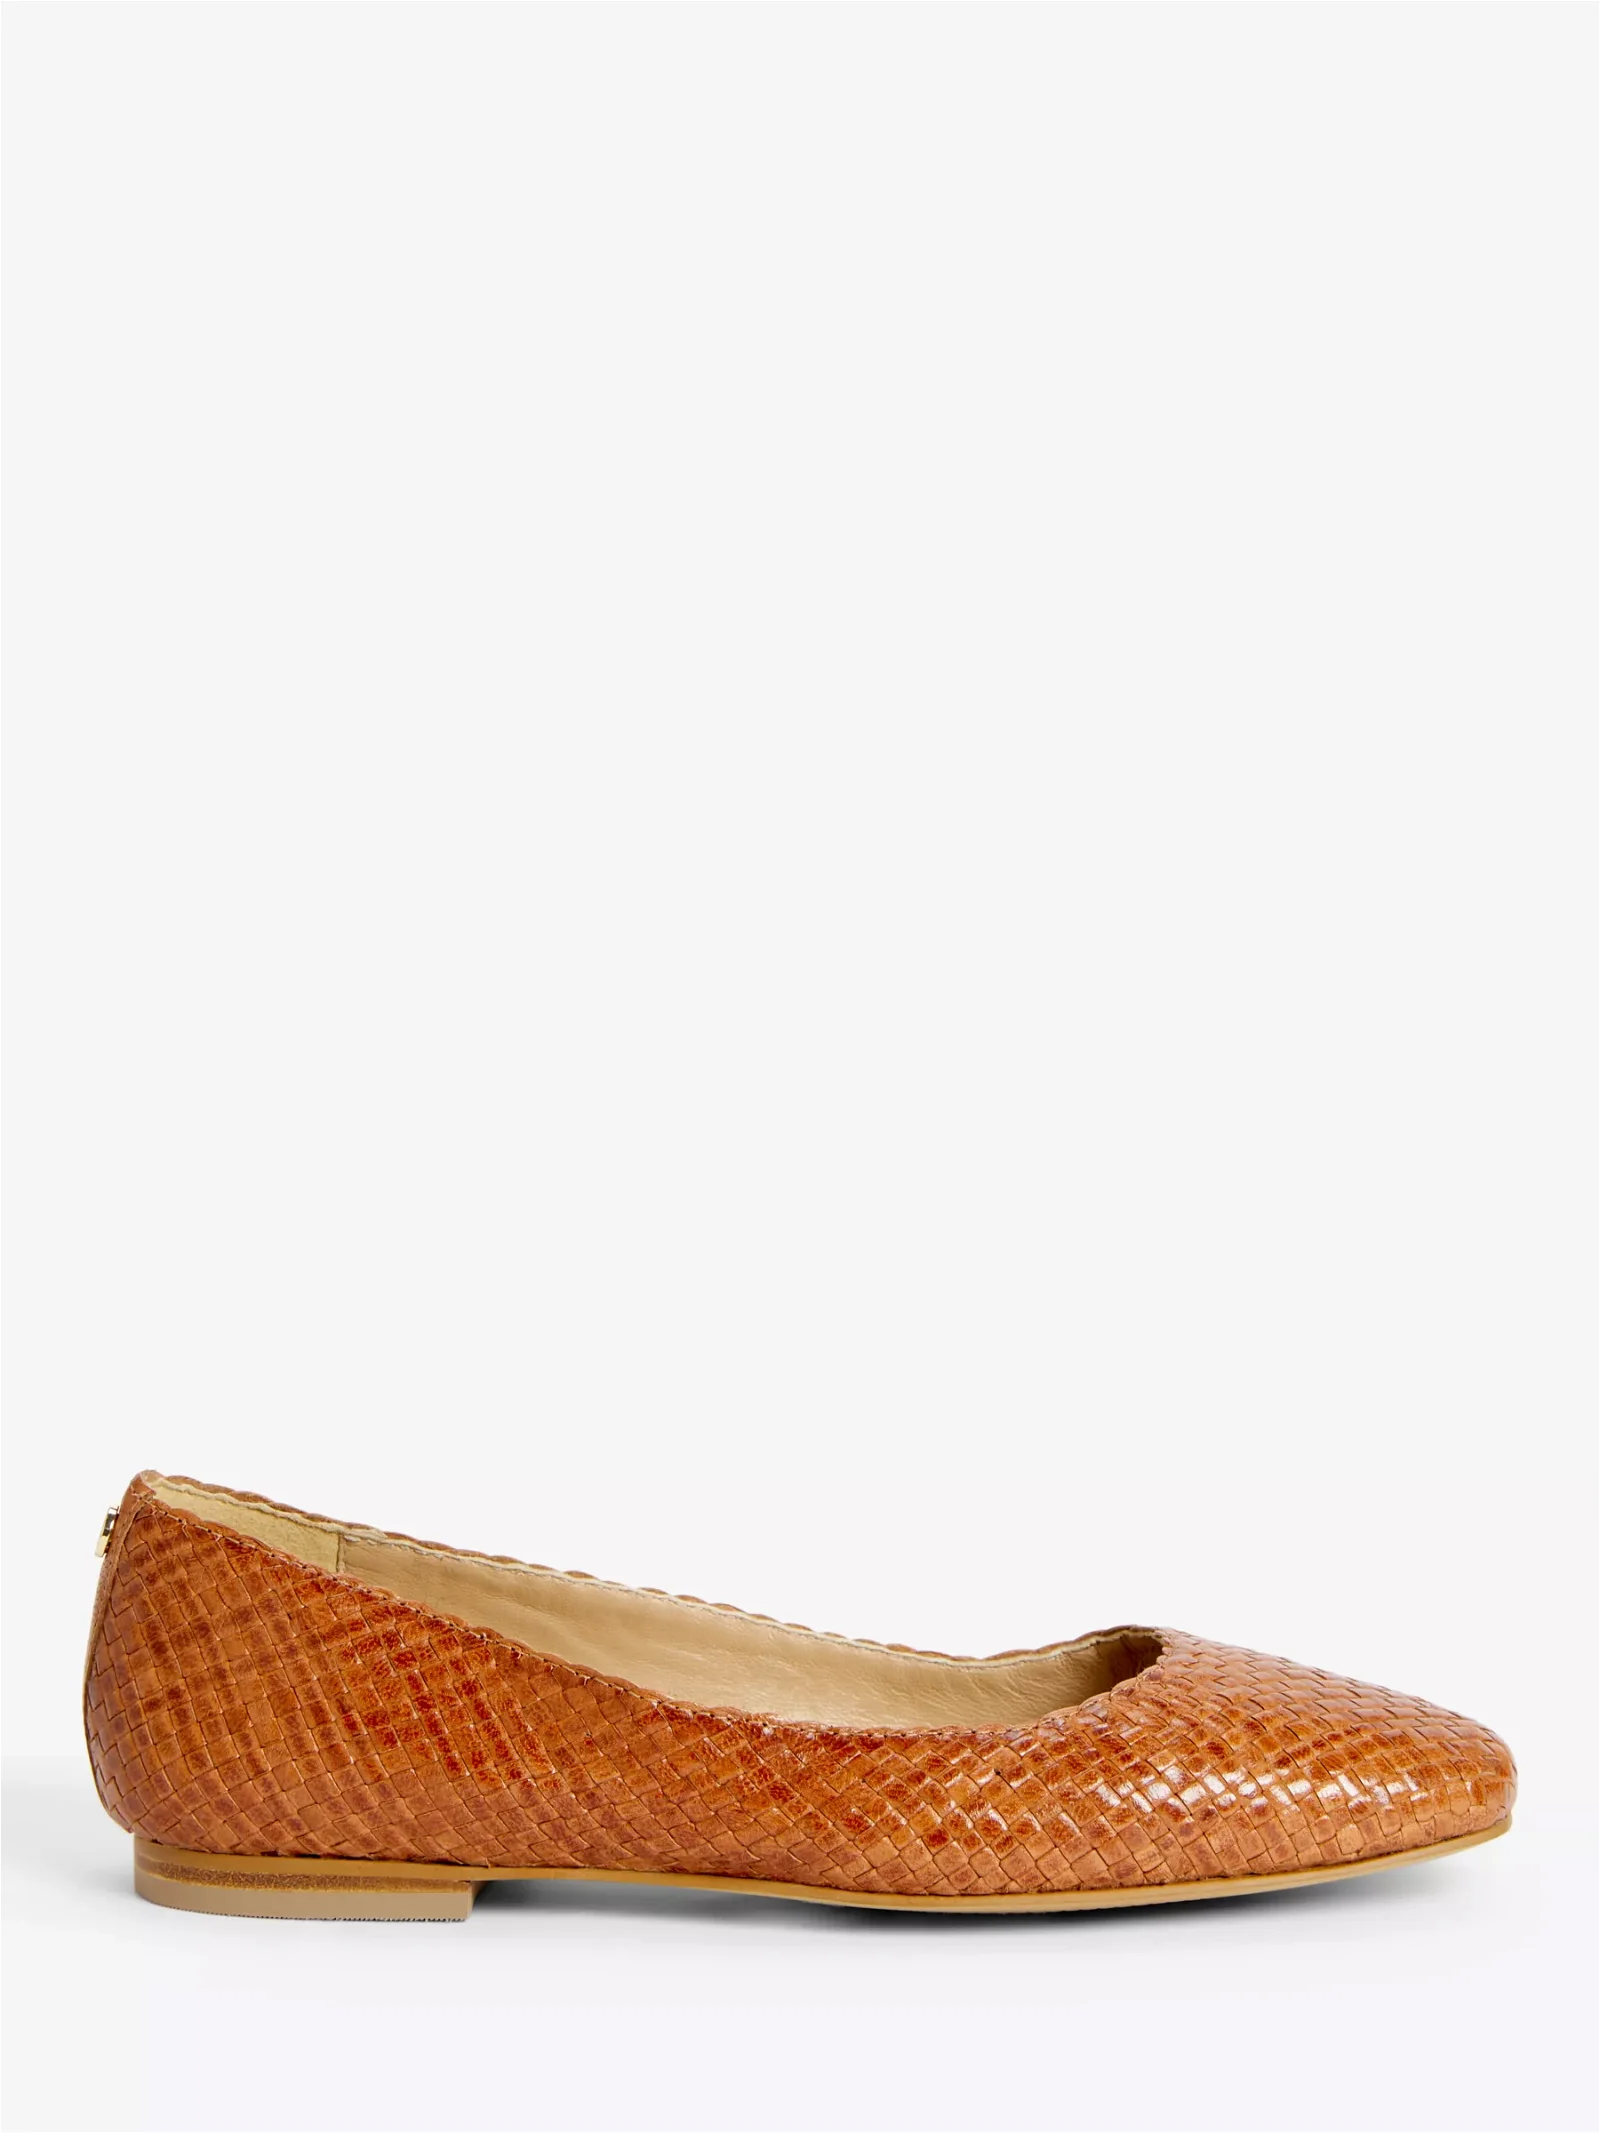 John Lewis Holly Leather Woven Ballerina Pumps, Gold at John Lewis